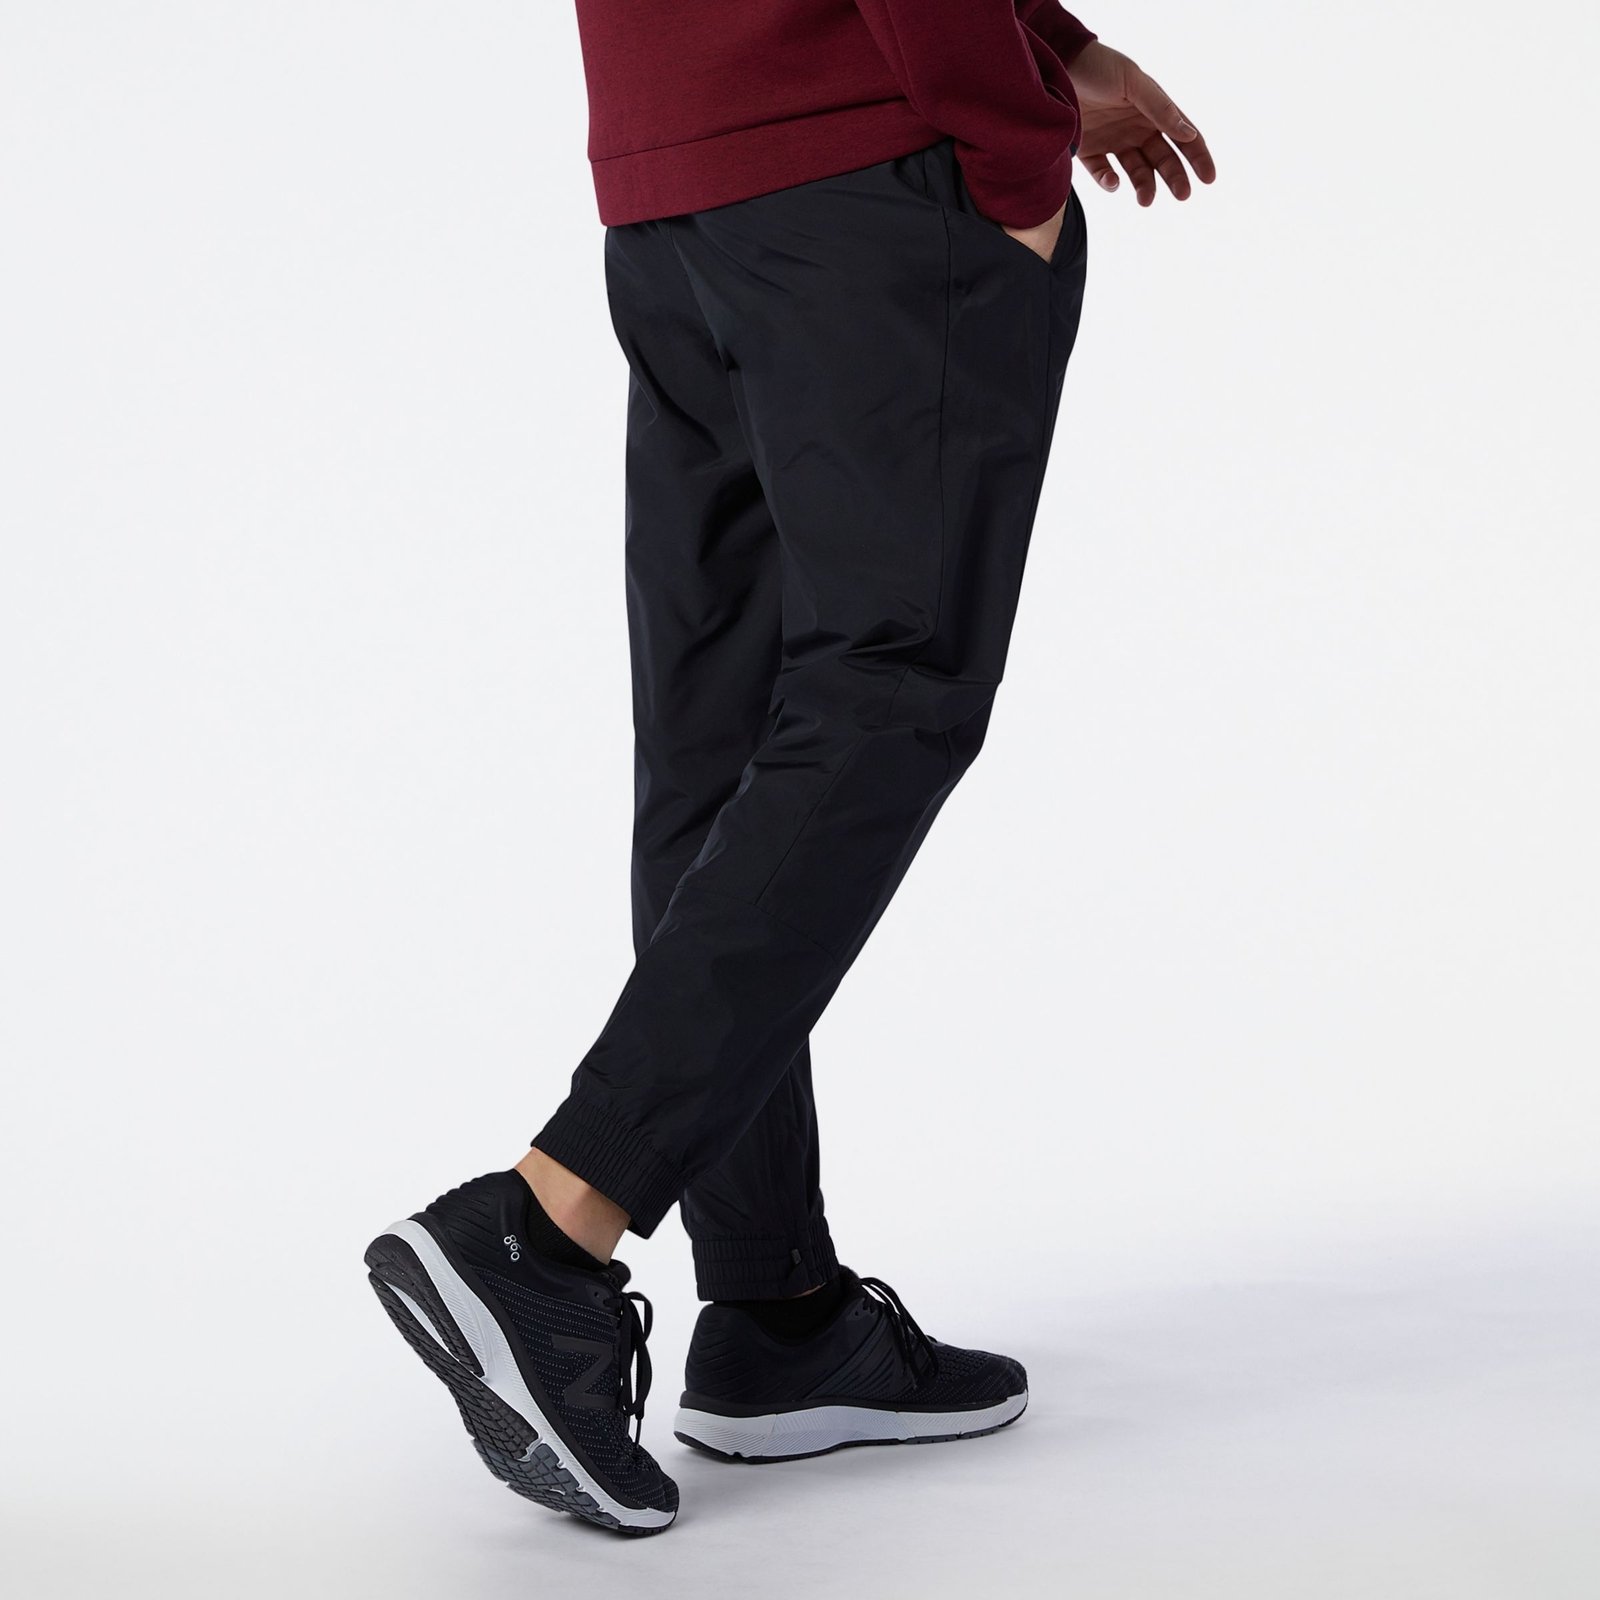 Buy Tenacity Lined Woven Pant online